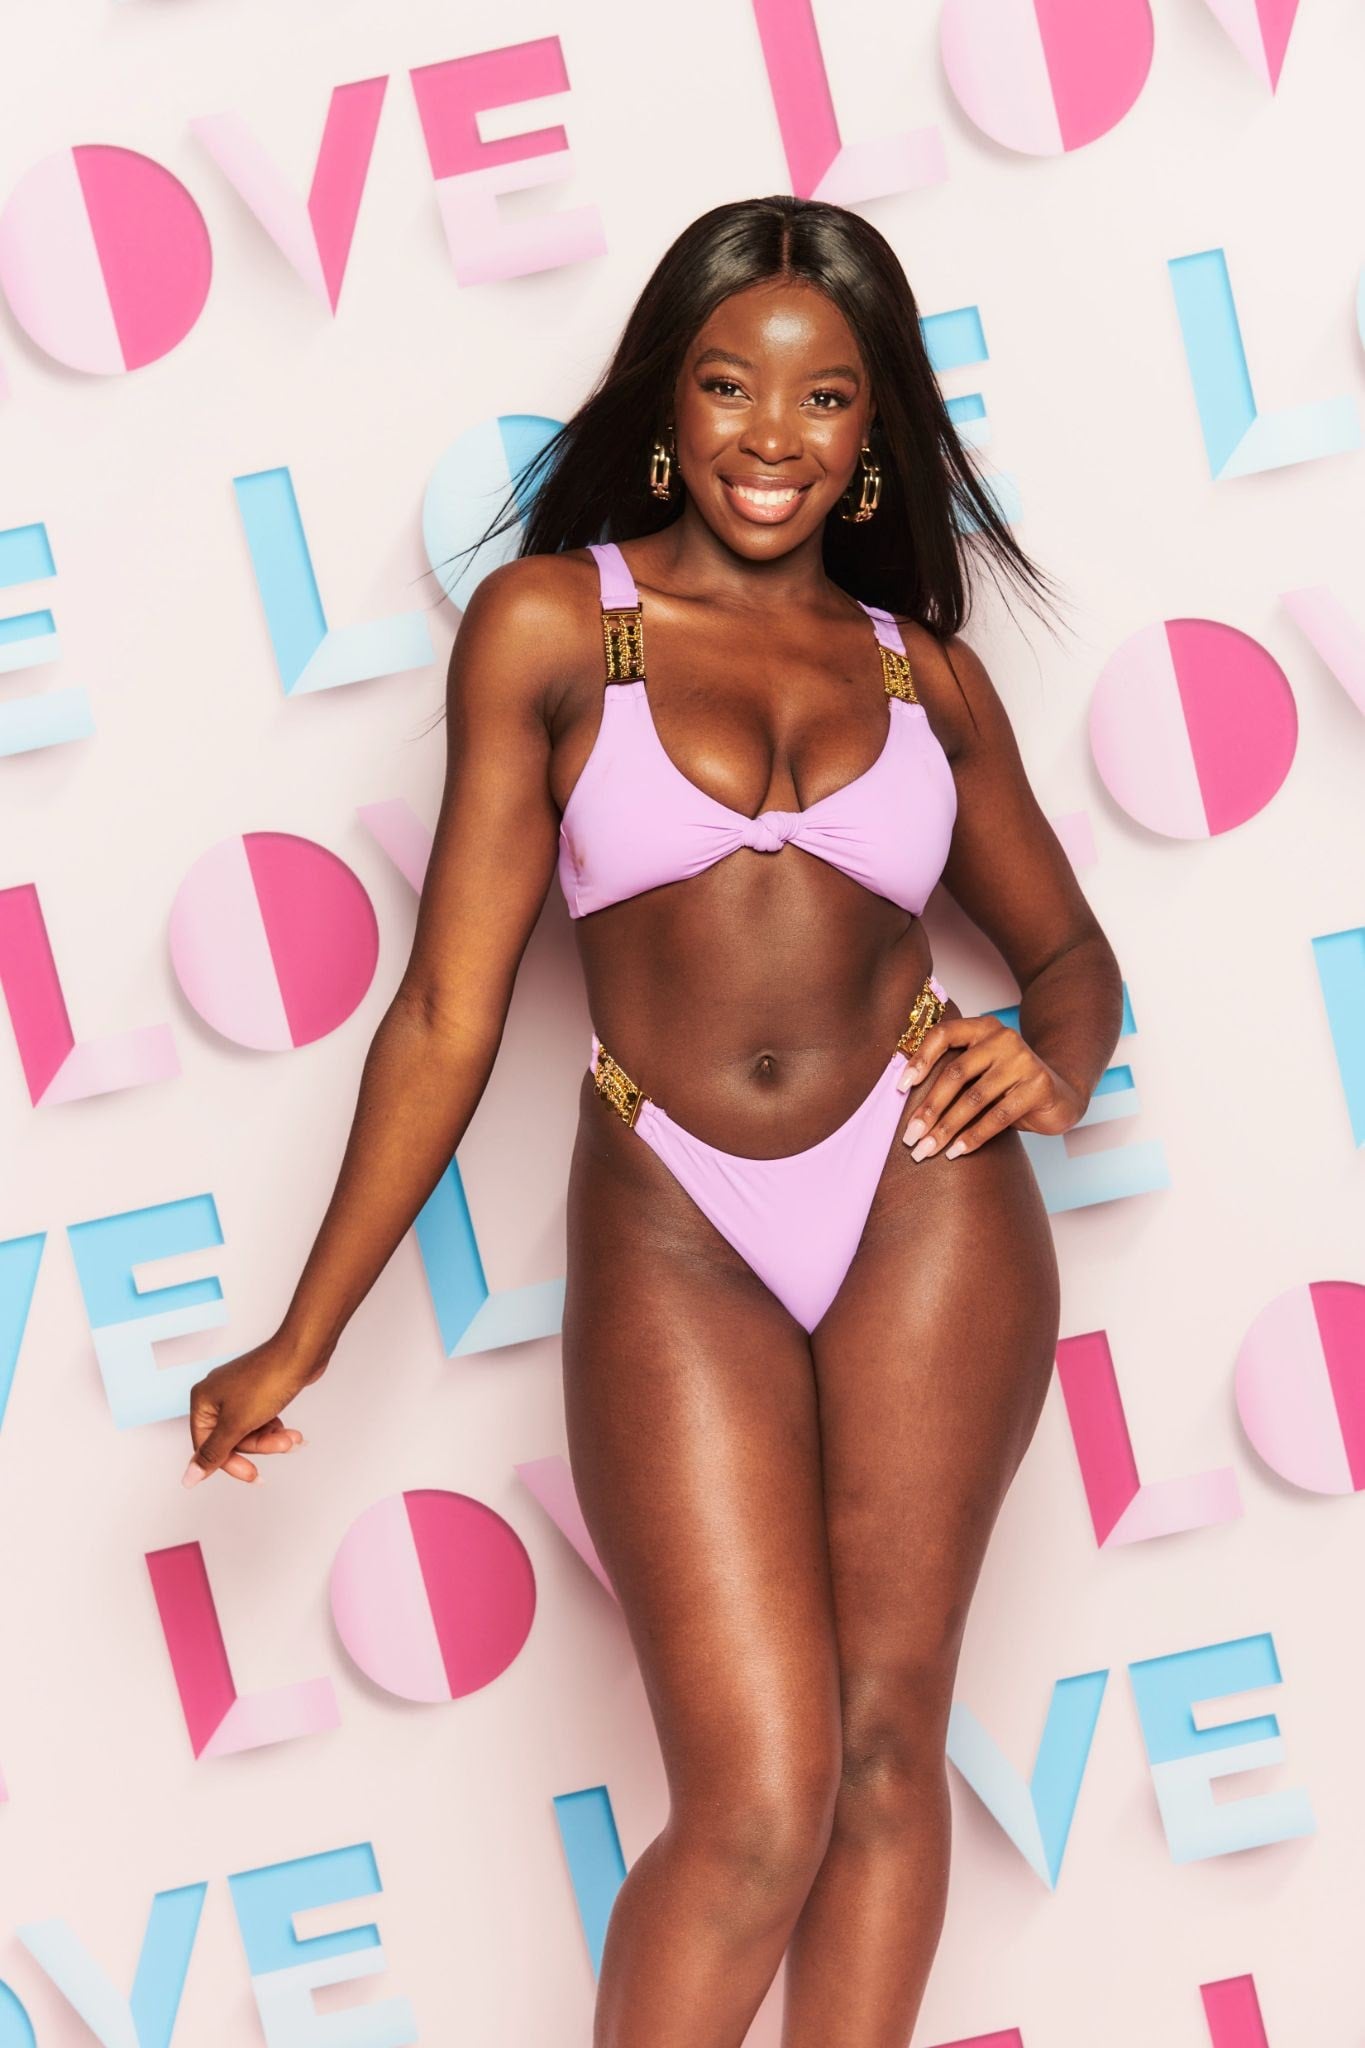 26-Year-Old Kaz Kamwi from Essex  Meet All the Love Island 2021